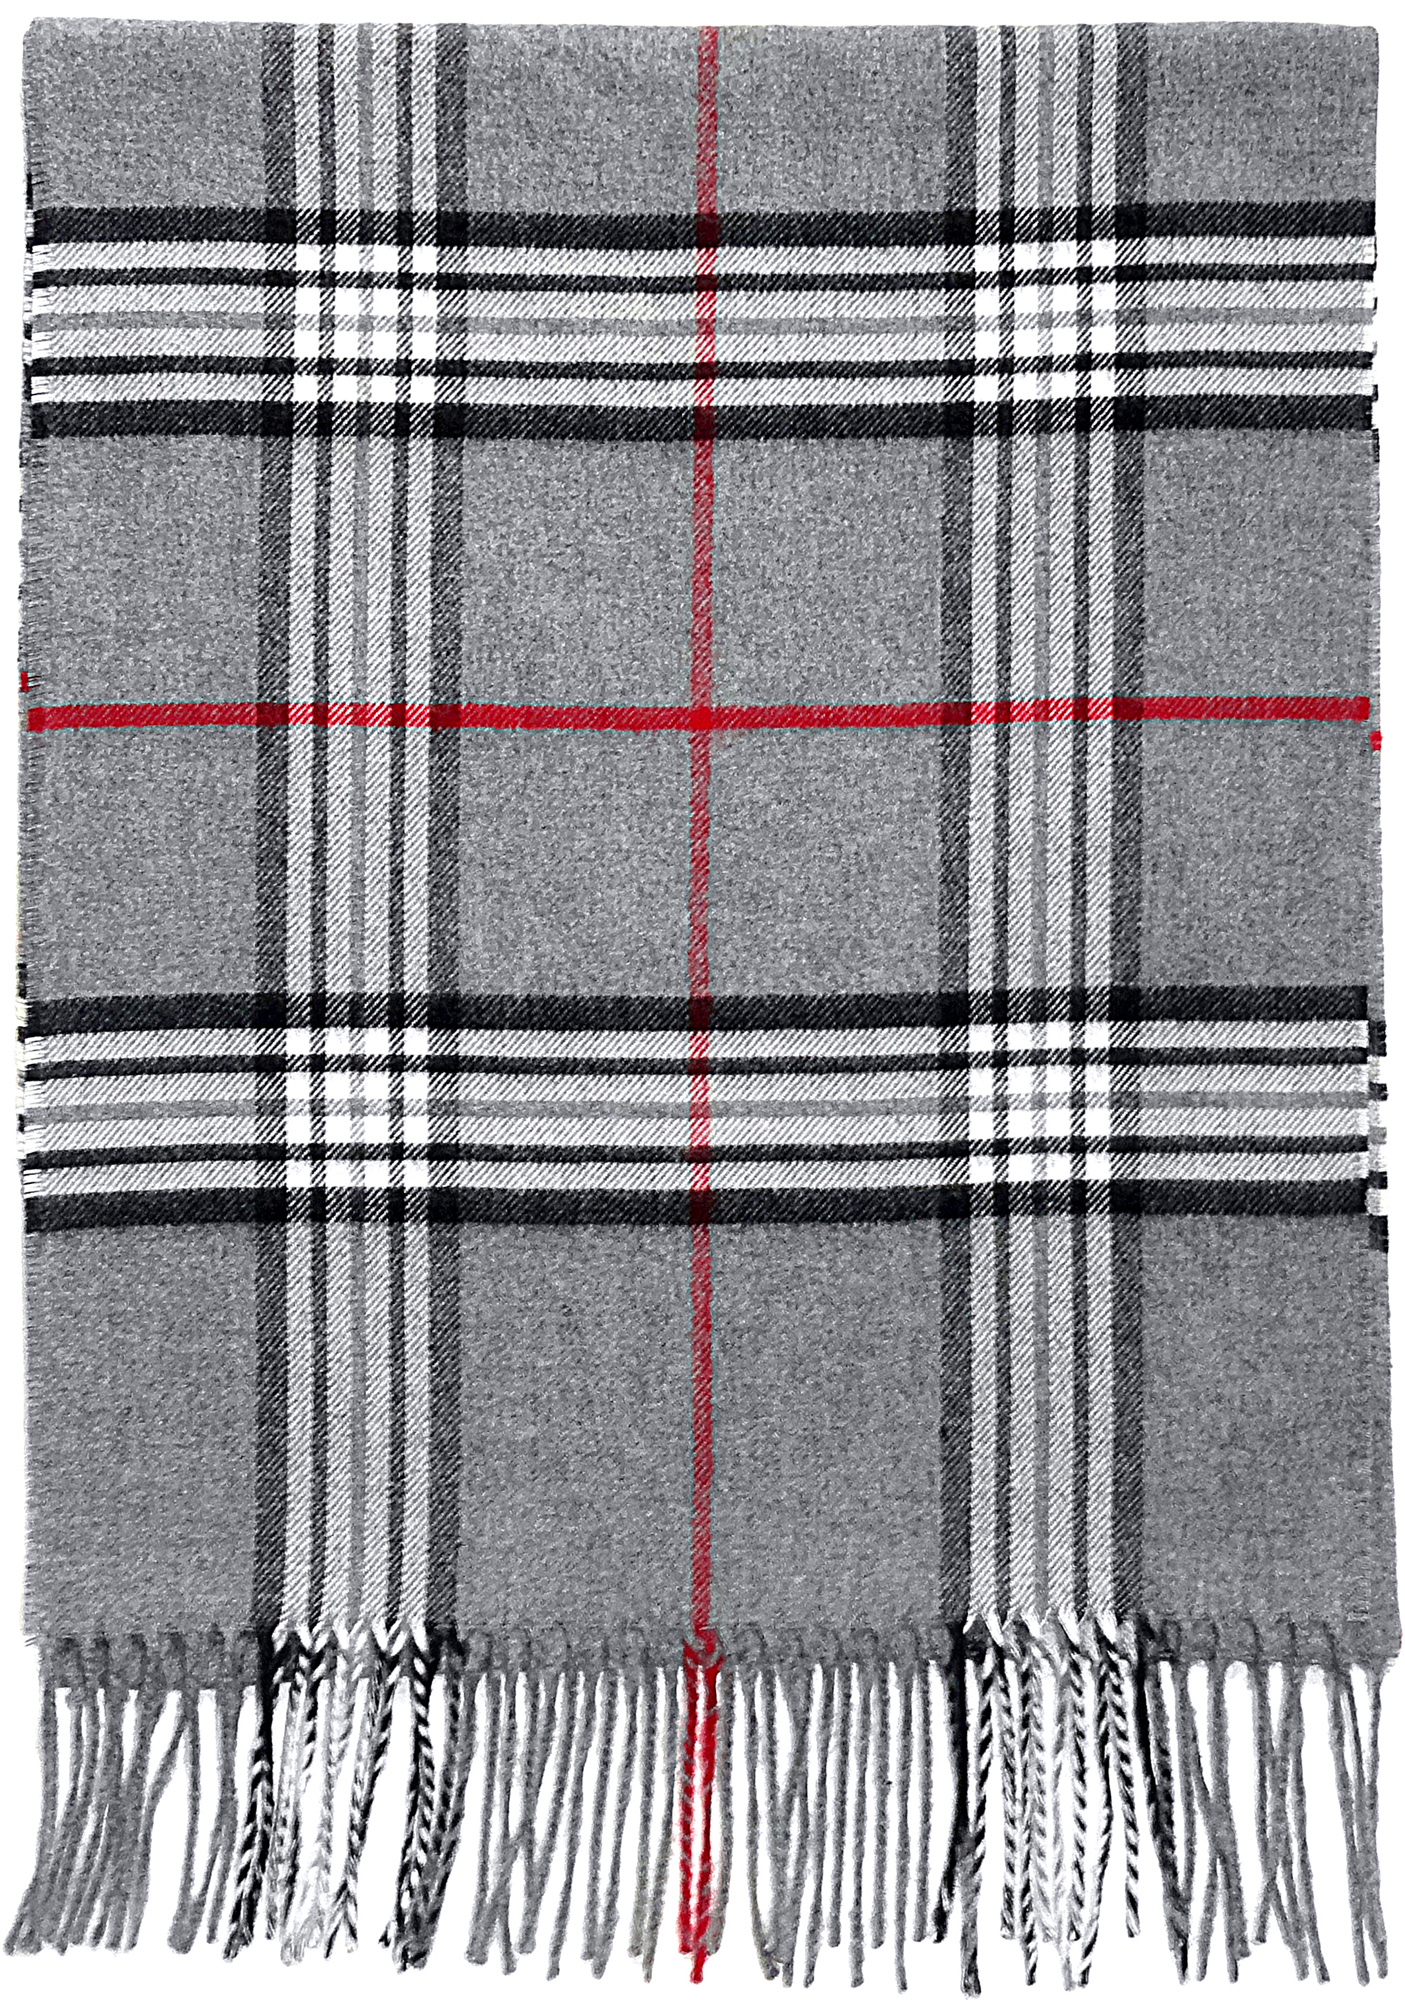 Fraas Plaid in Grey- $35.00
Cashmink, Made in Germany
771899115990